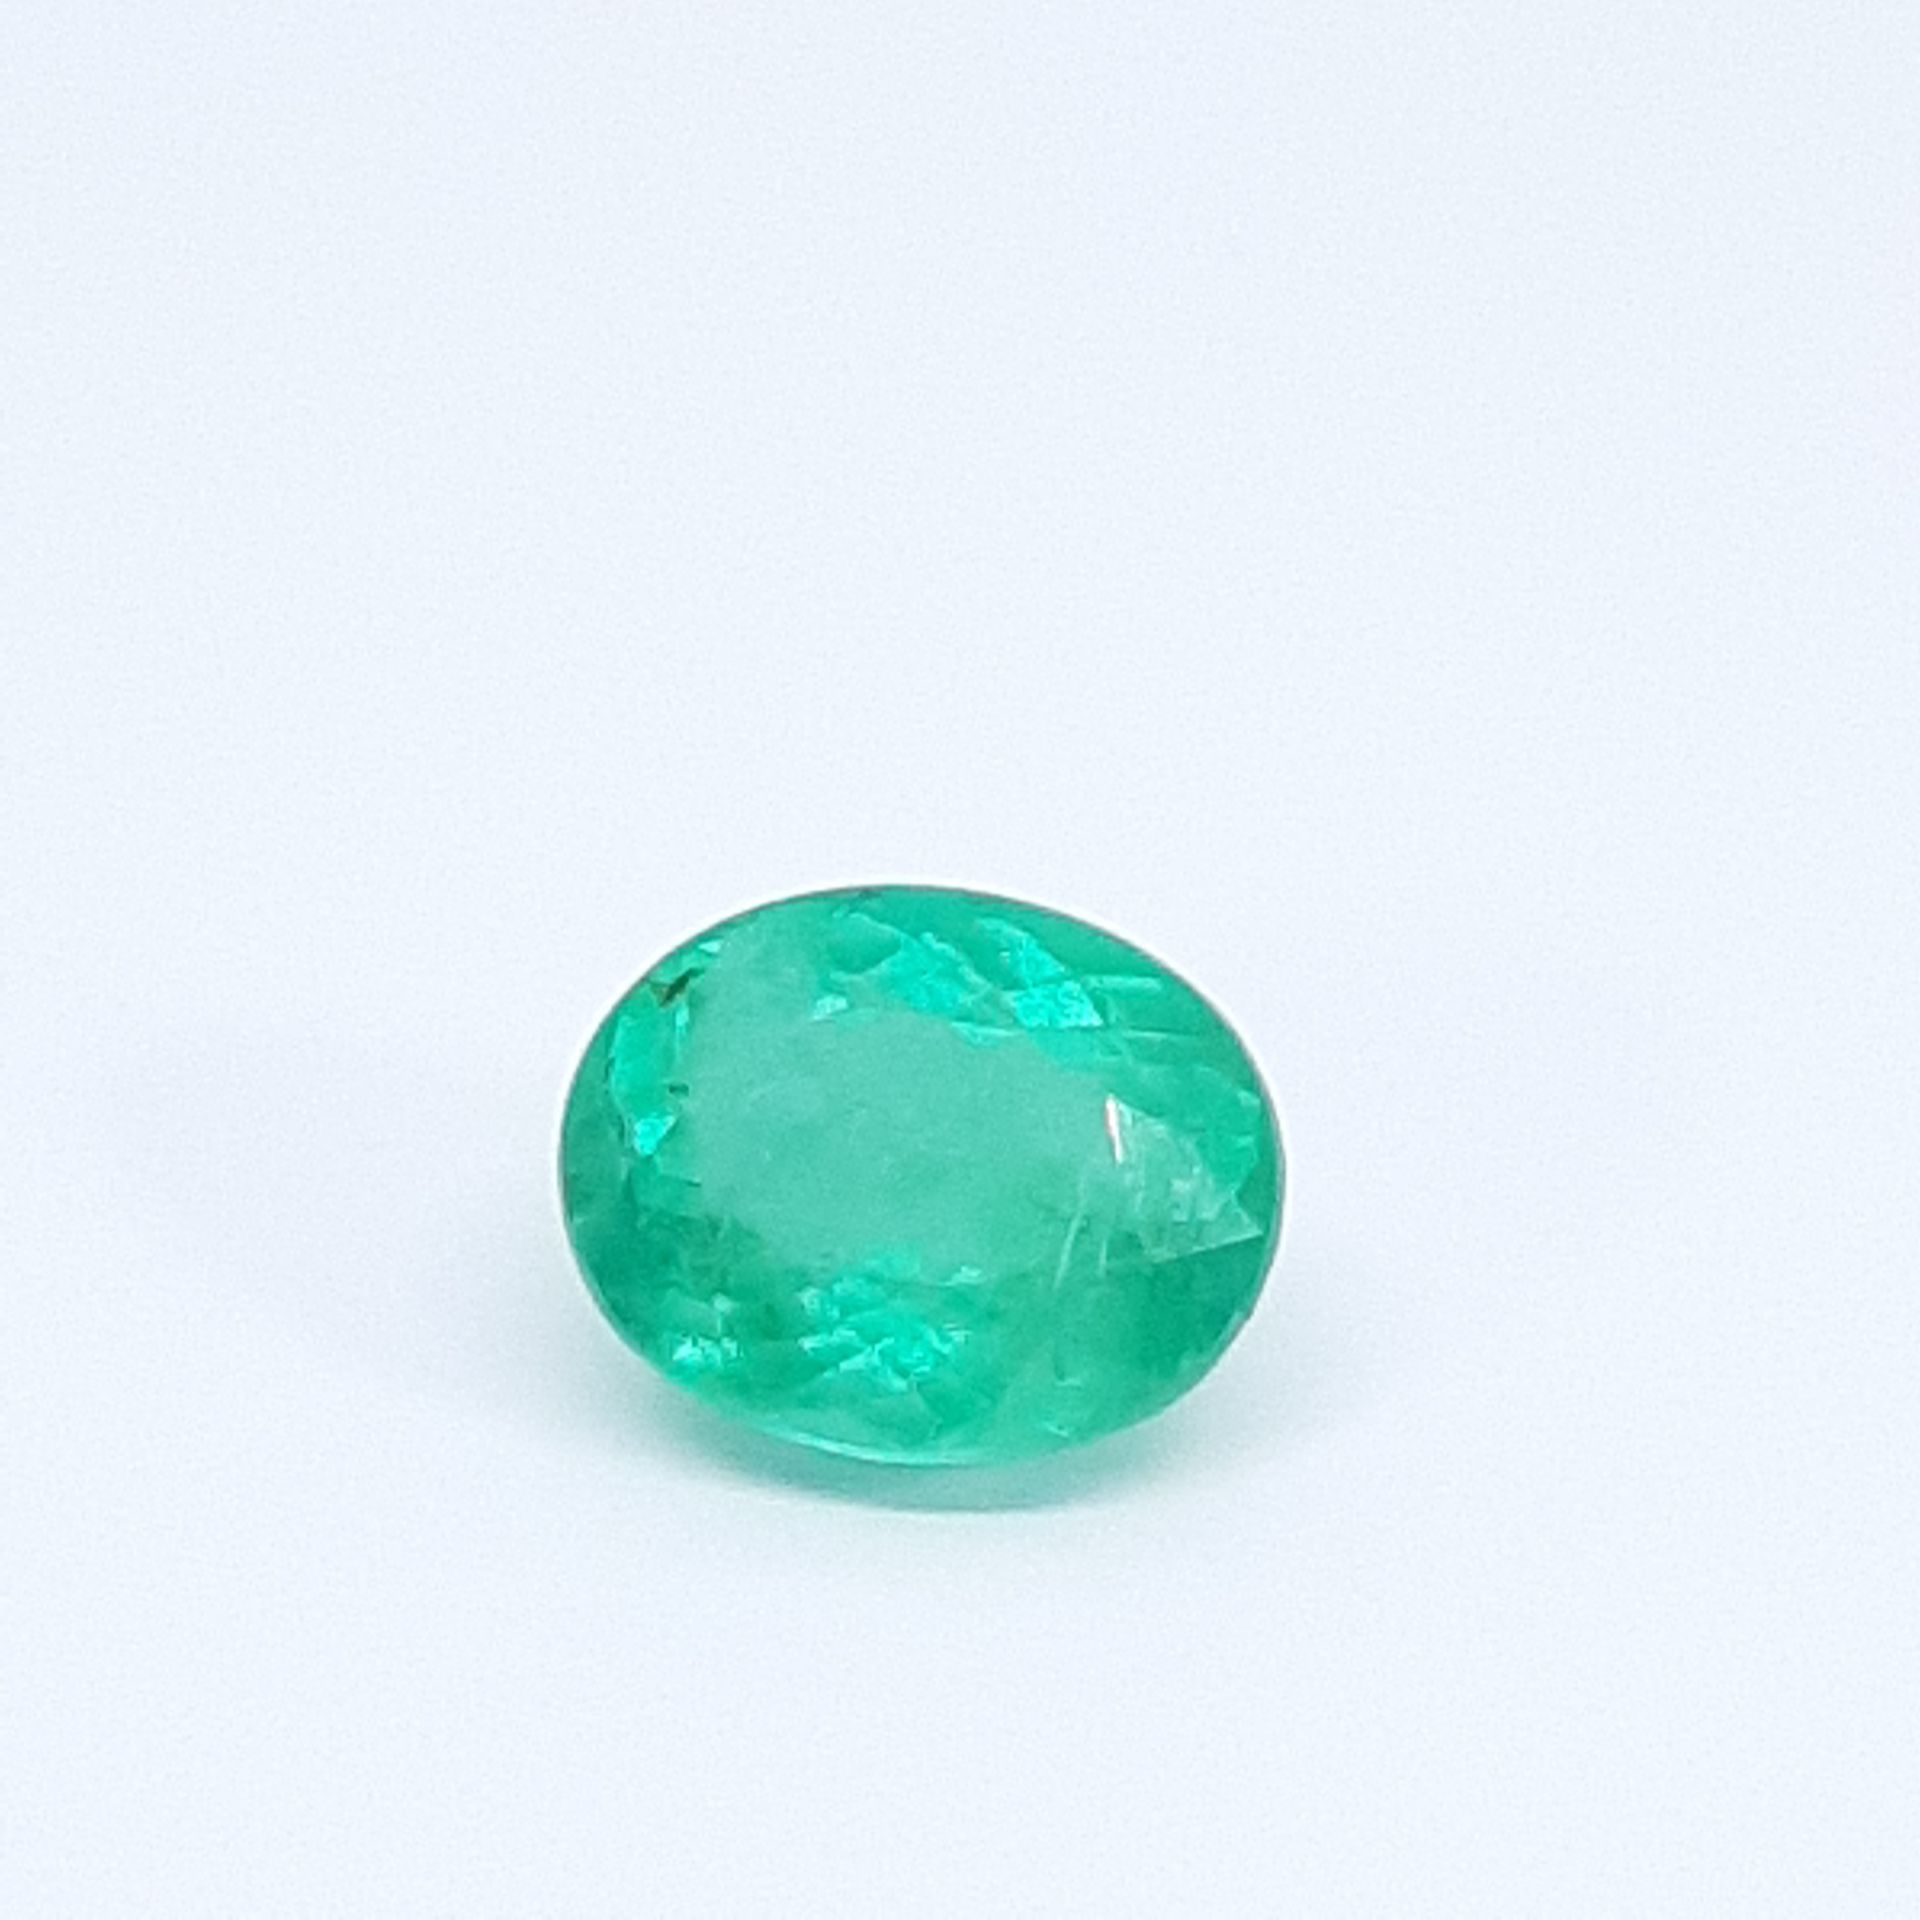 Emeraude - Brésil - 2.85 cts EMERAUD - From Brazil - Green color - Oval size - I&hellip;